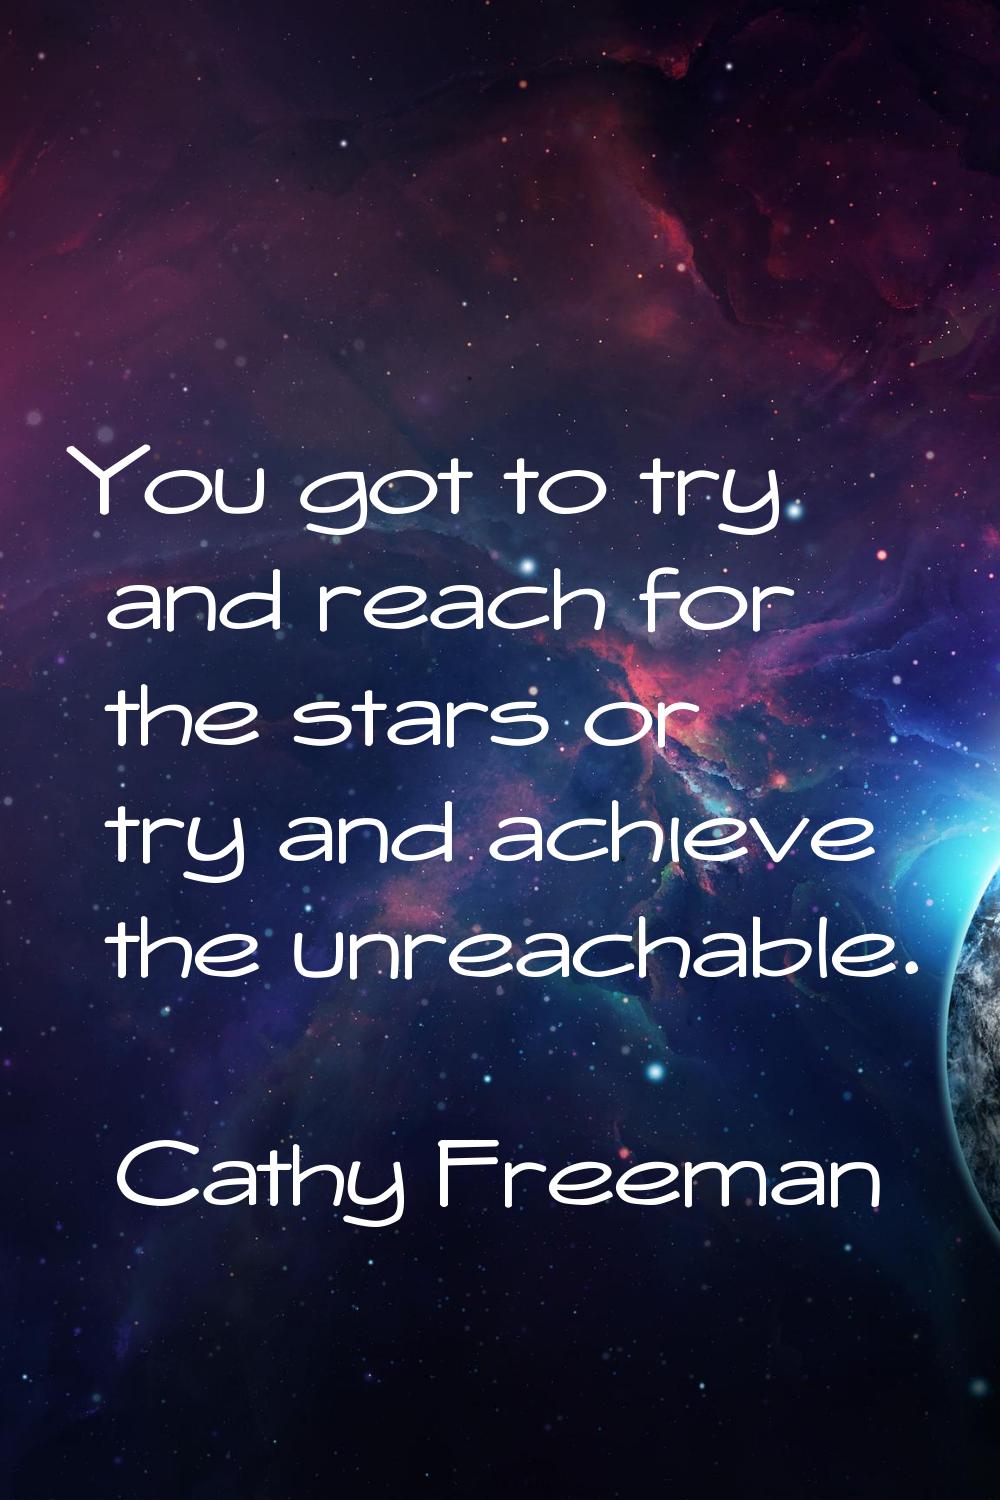 You got to try and reach for the stars or try and achieve the unreachable.